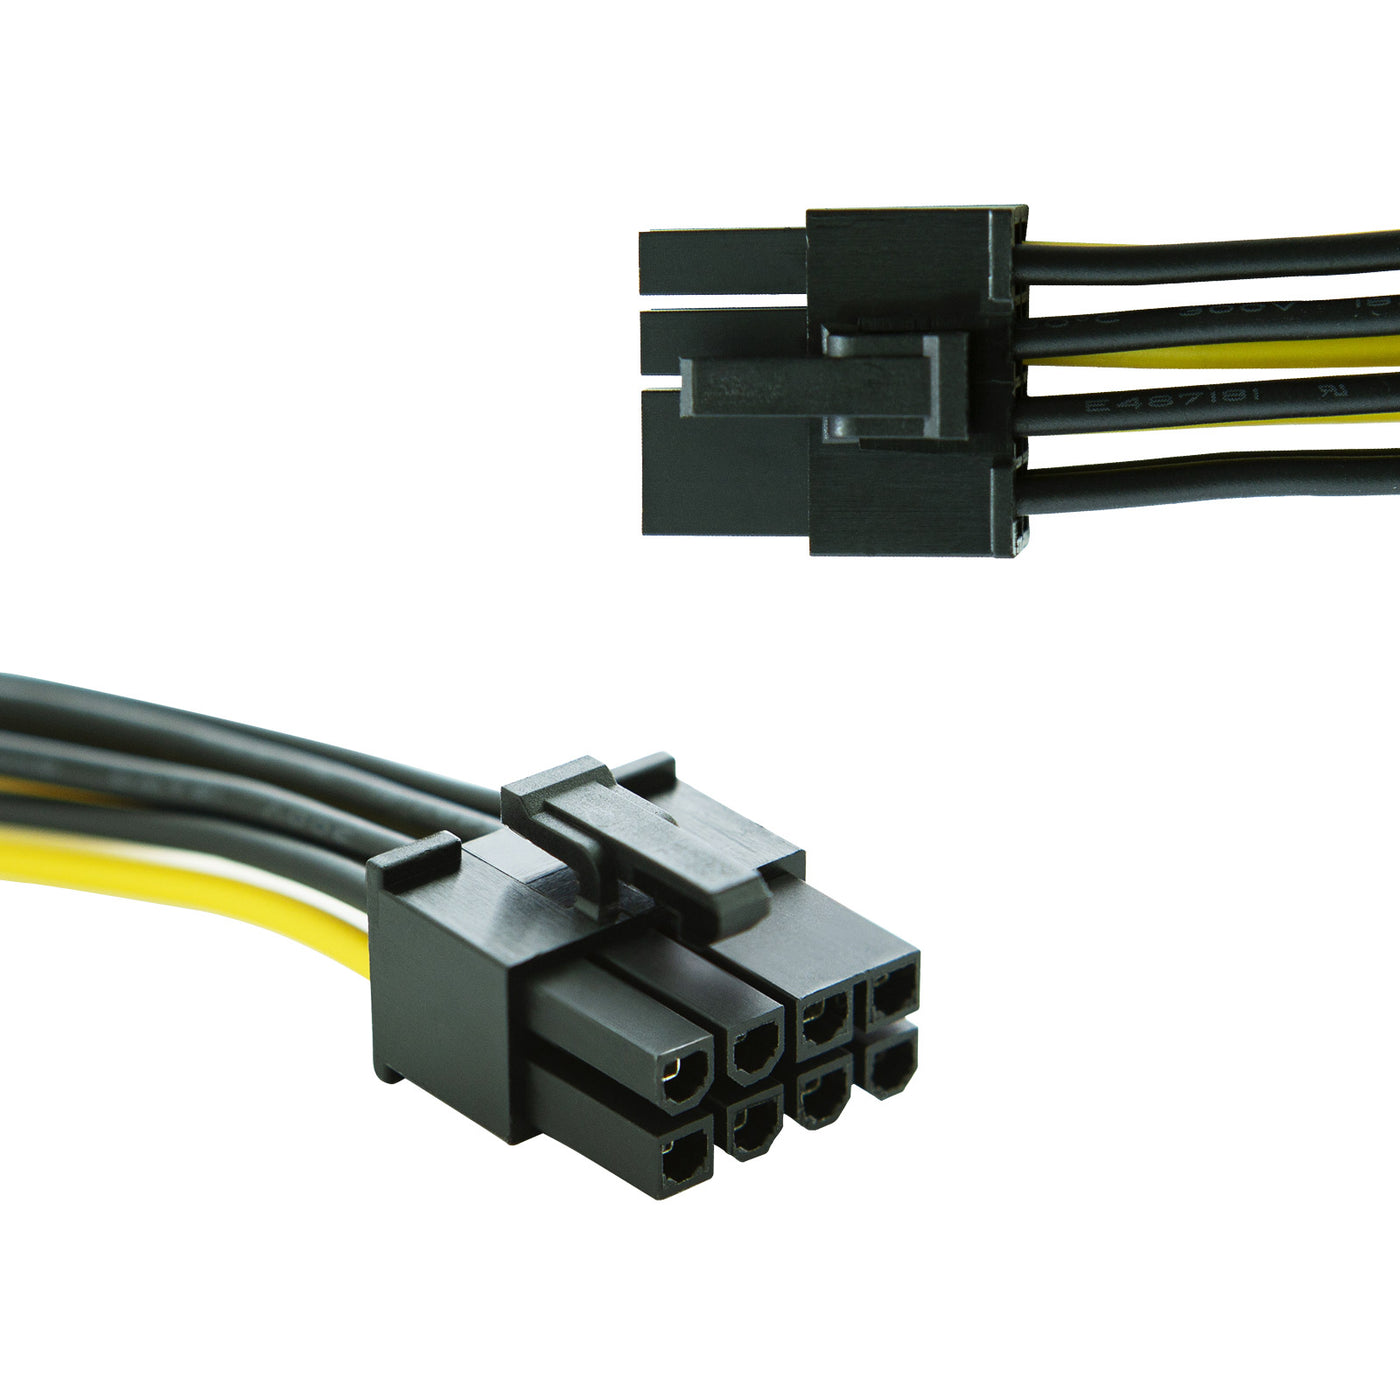 2-Pack Molex to PCIe Power Cable